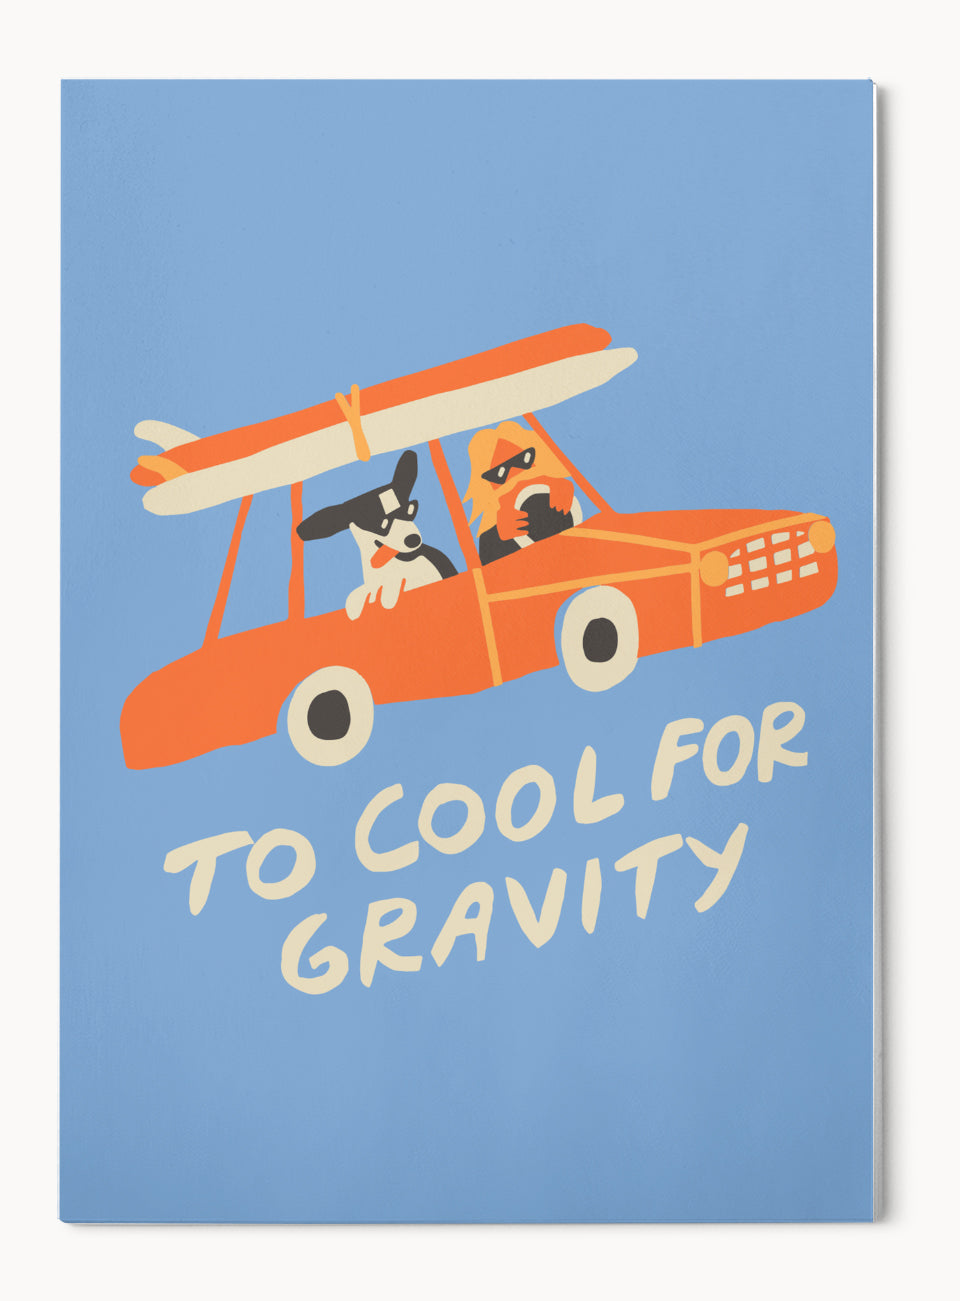 Too cool for gravity - Card